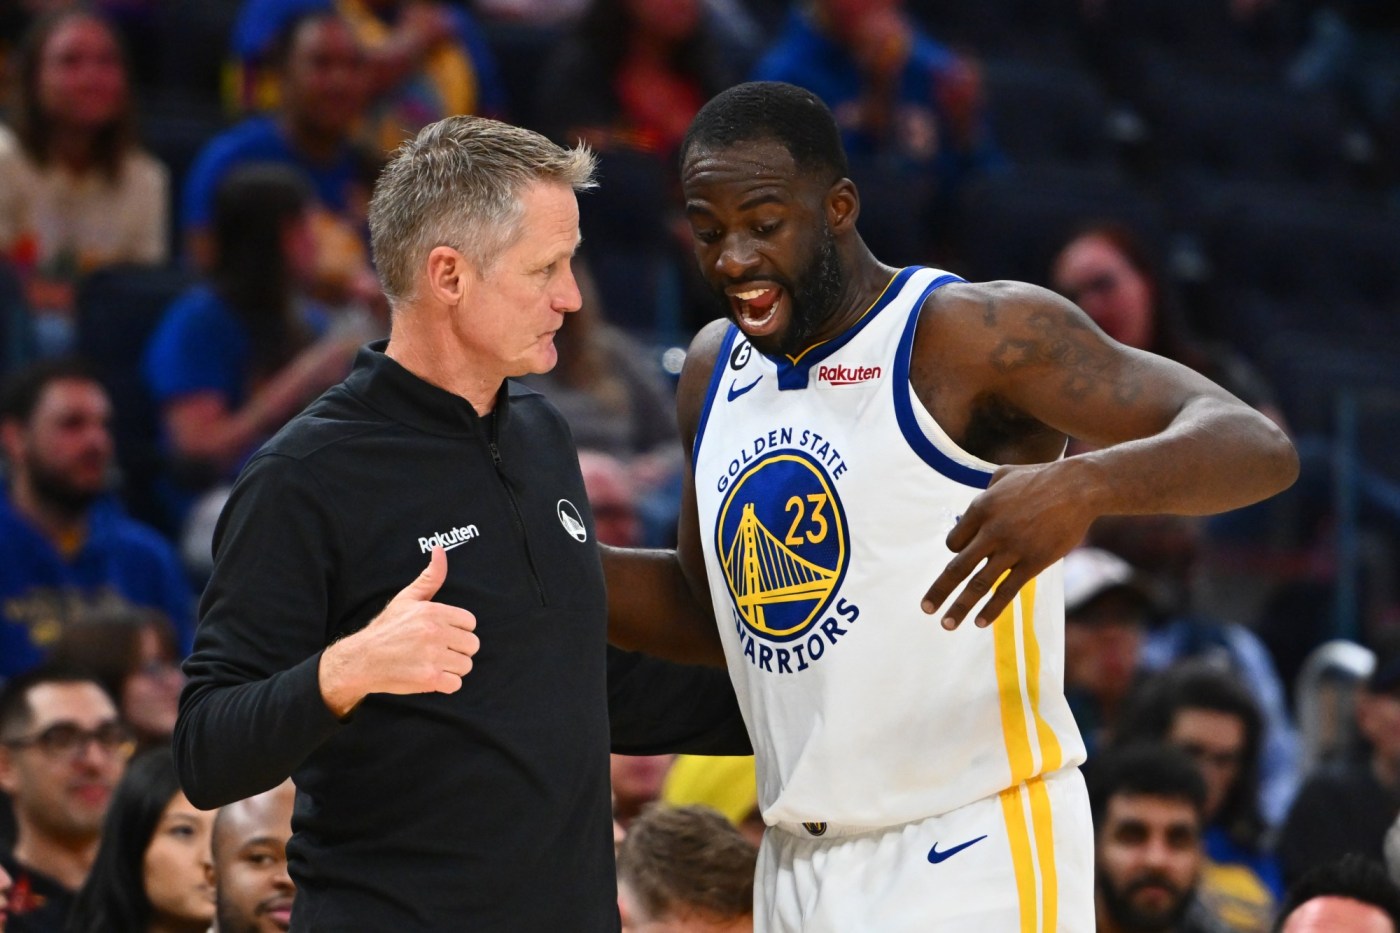 warriors-coach-steve-kerr-on-draymond-green:-“if-we-decided-he-wasn’t-worth-it-…-we-would-have-moved-off-of-him-years-ago”